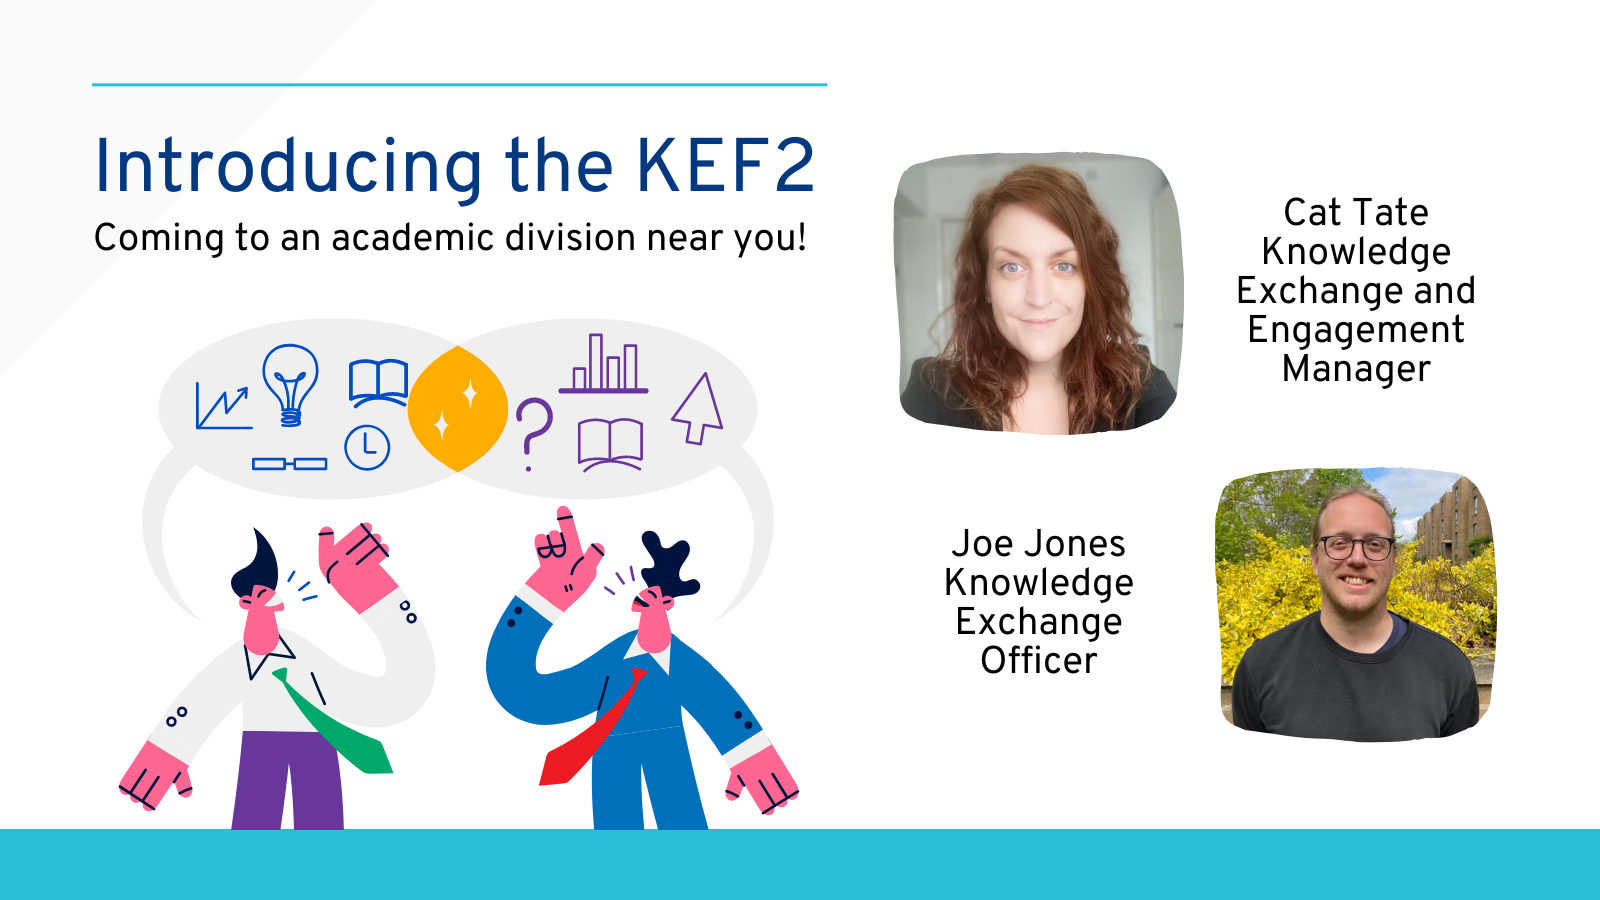 Introducing the KEF2 - coming to an academic division near you. With Cat Tate and Joe Jones